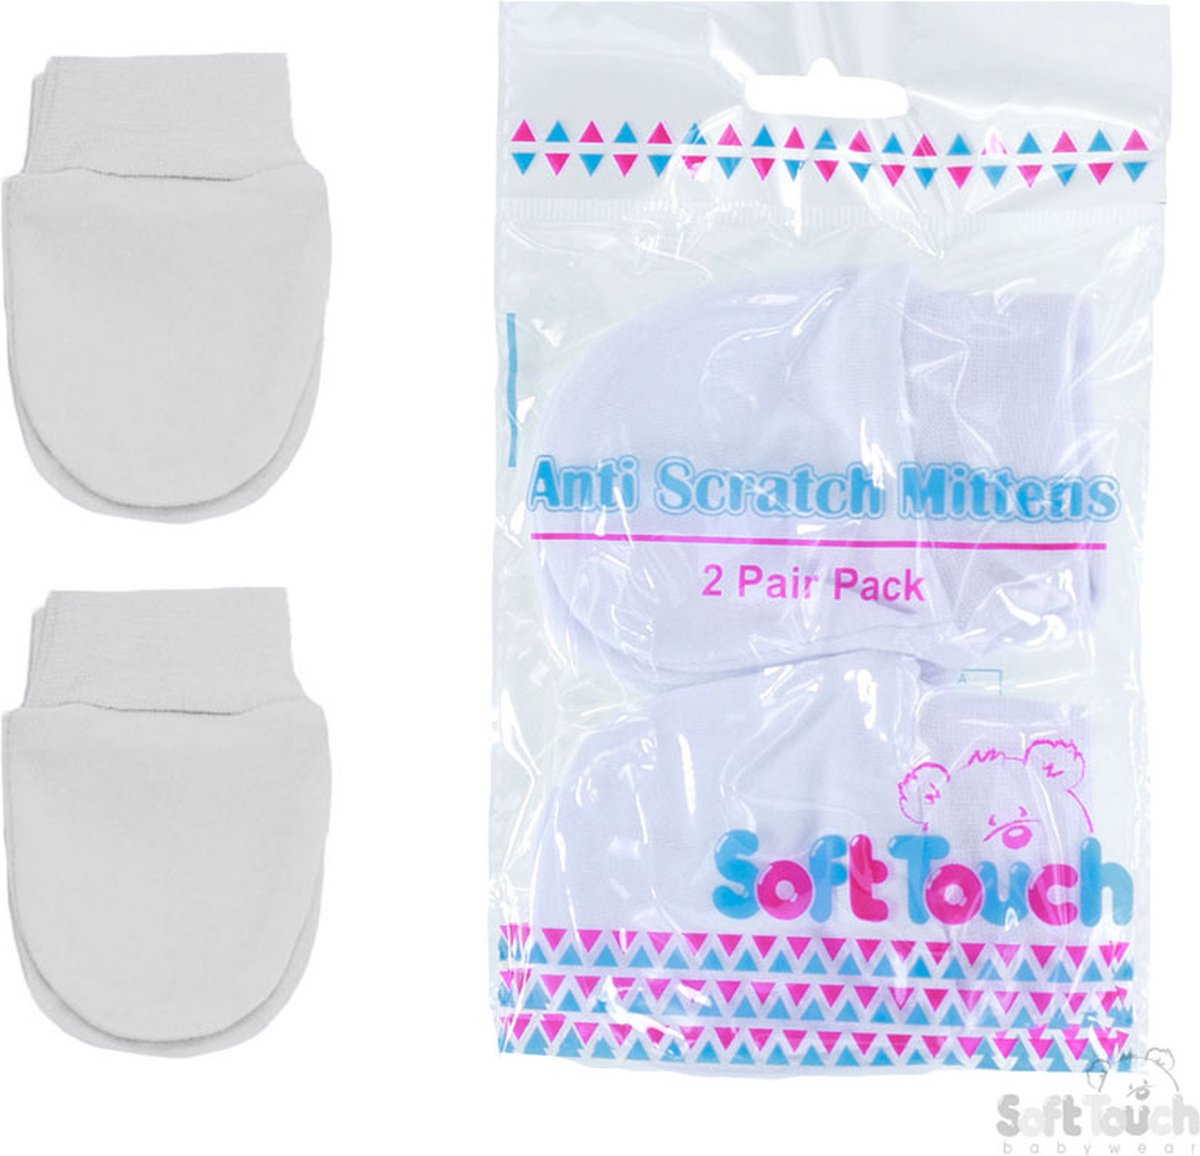 Soft Touch 2-pack Krabwantjes Wit 0-6 Maanden P110 - softtouch